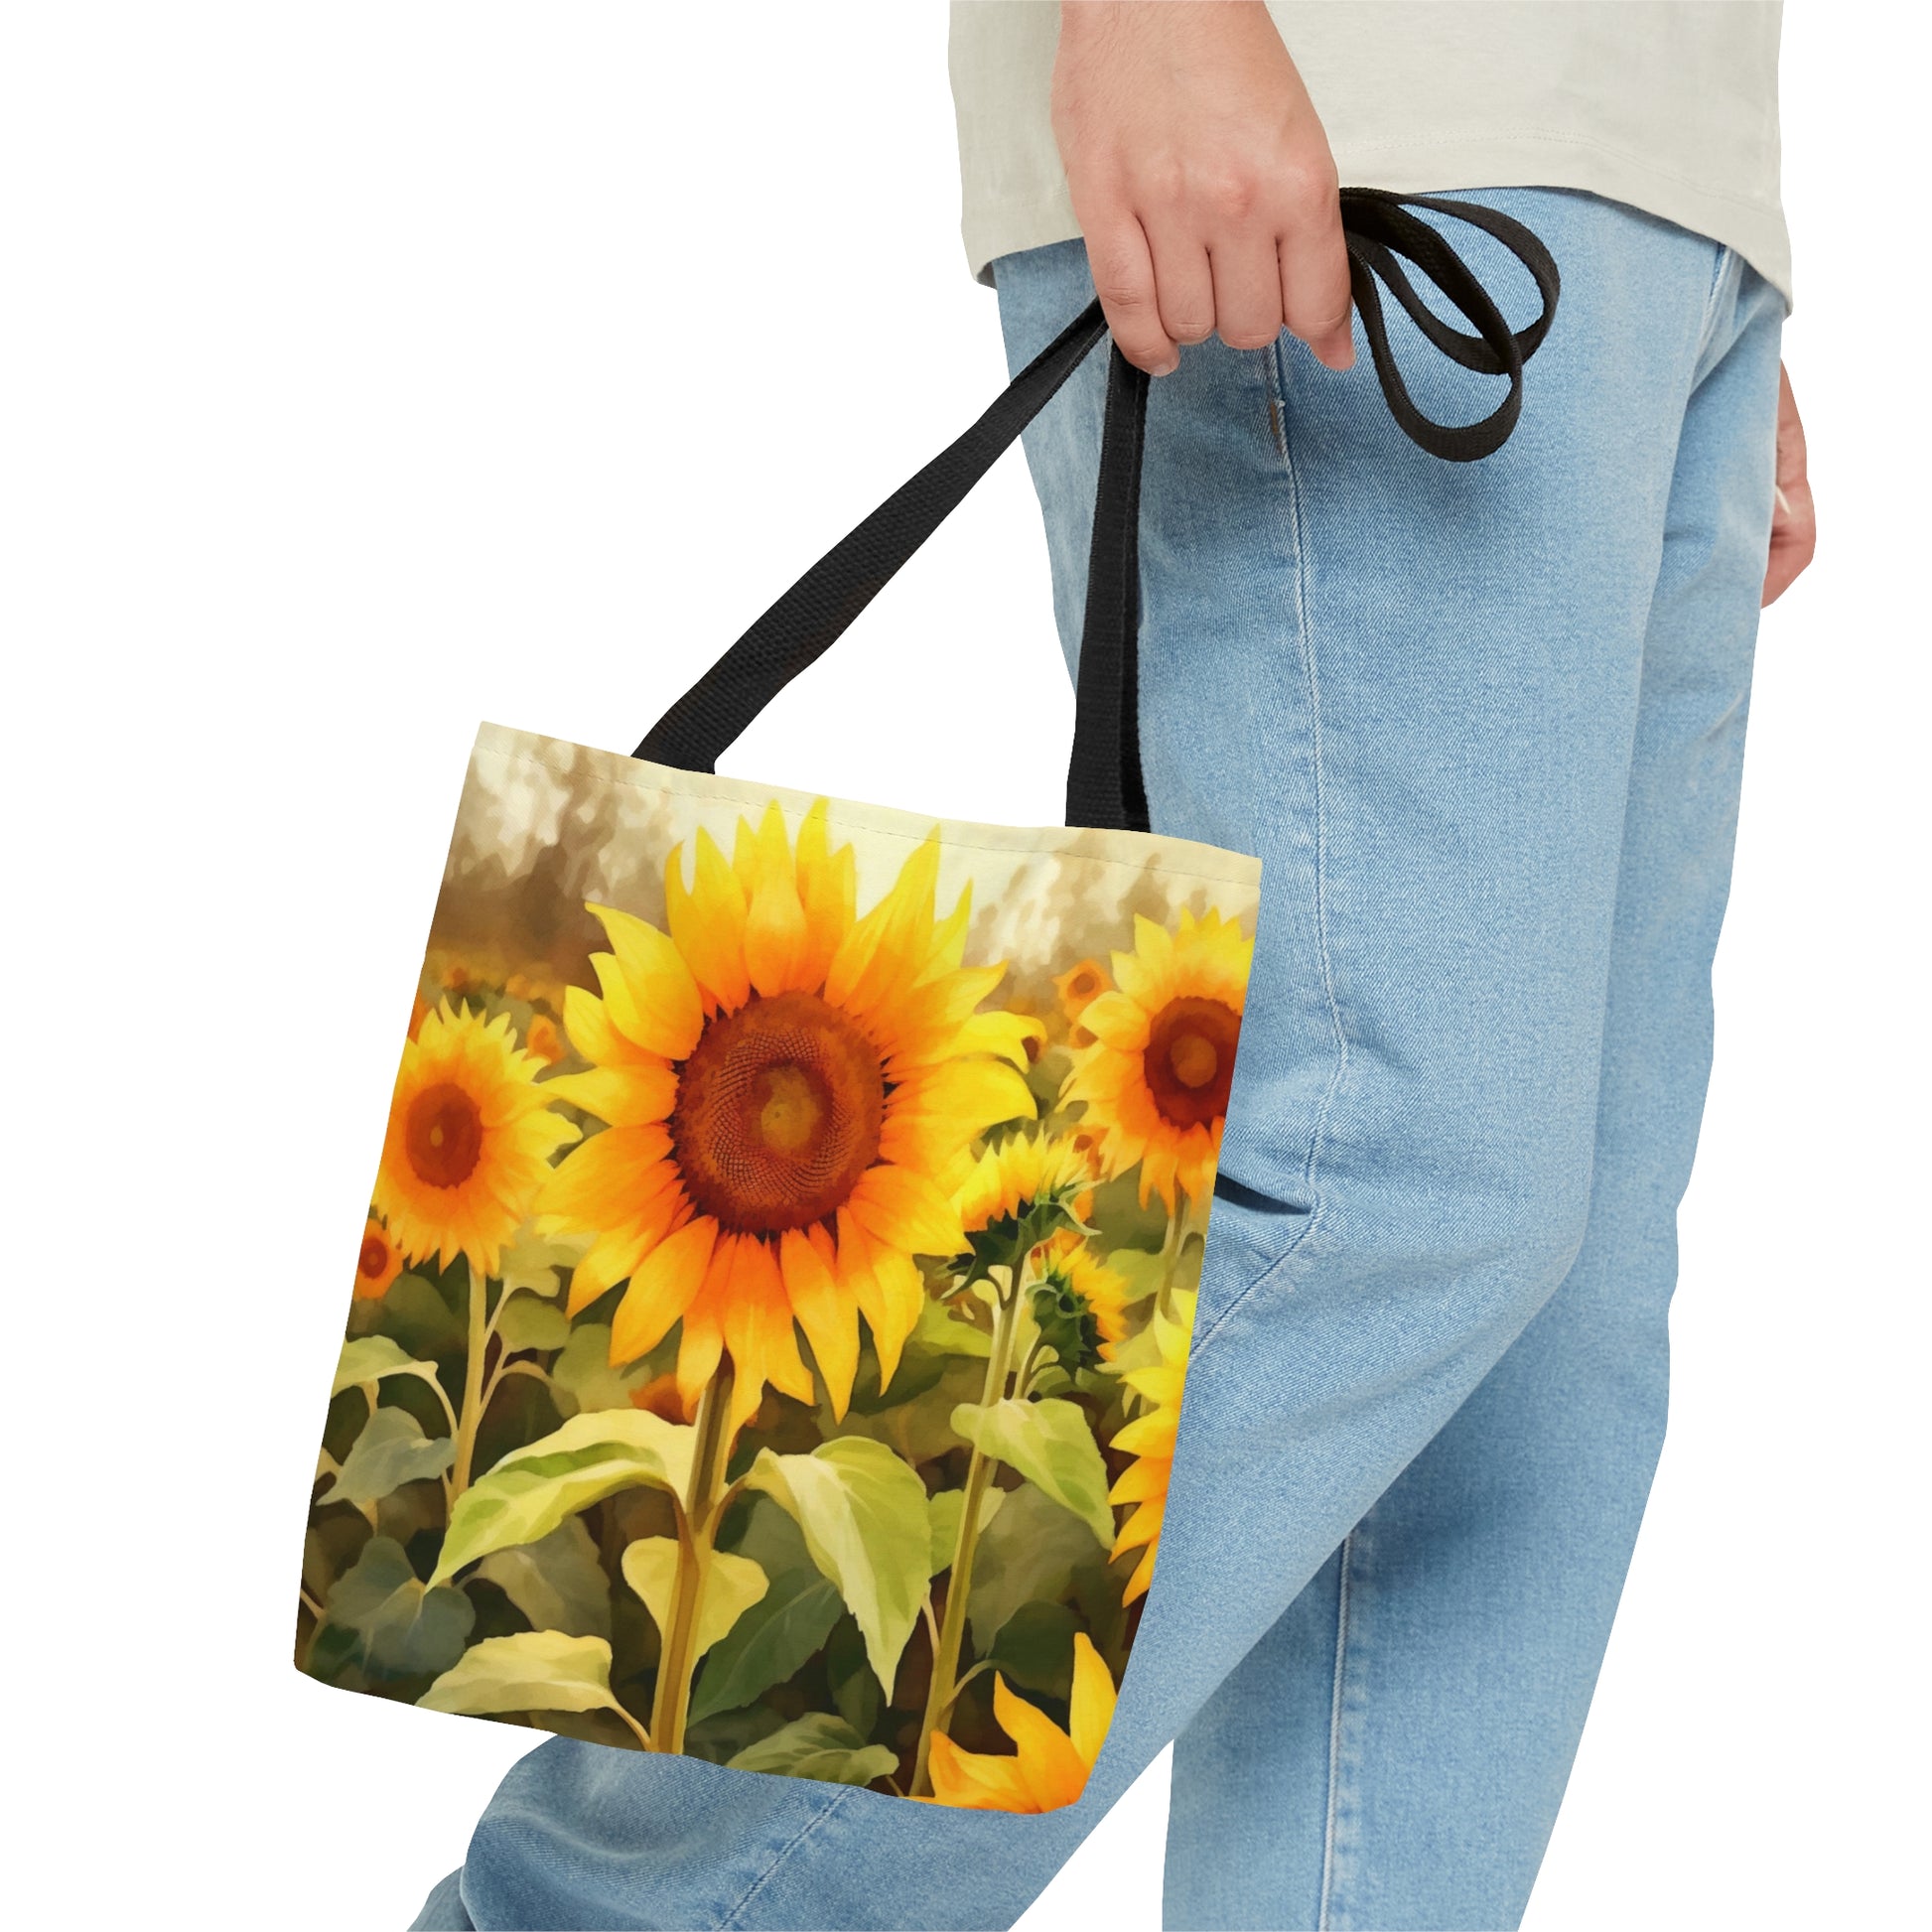 Sunflower Field Tote Bag, Yellow Flowers Cute Canvas Shopping Small Large Travel Reusable Aesthetic Shoulder Bag Starcove Fashion